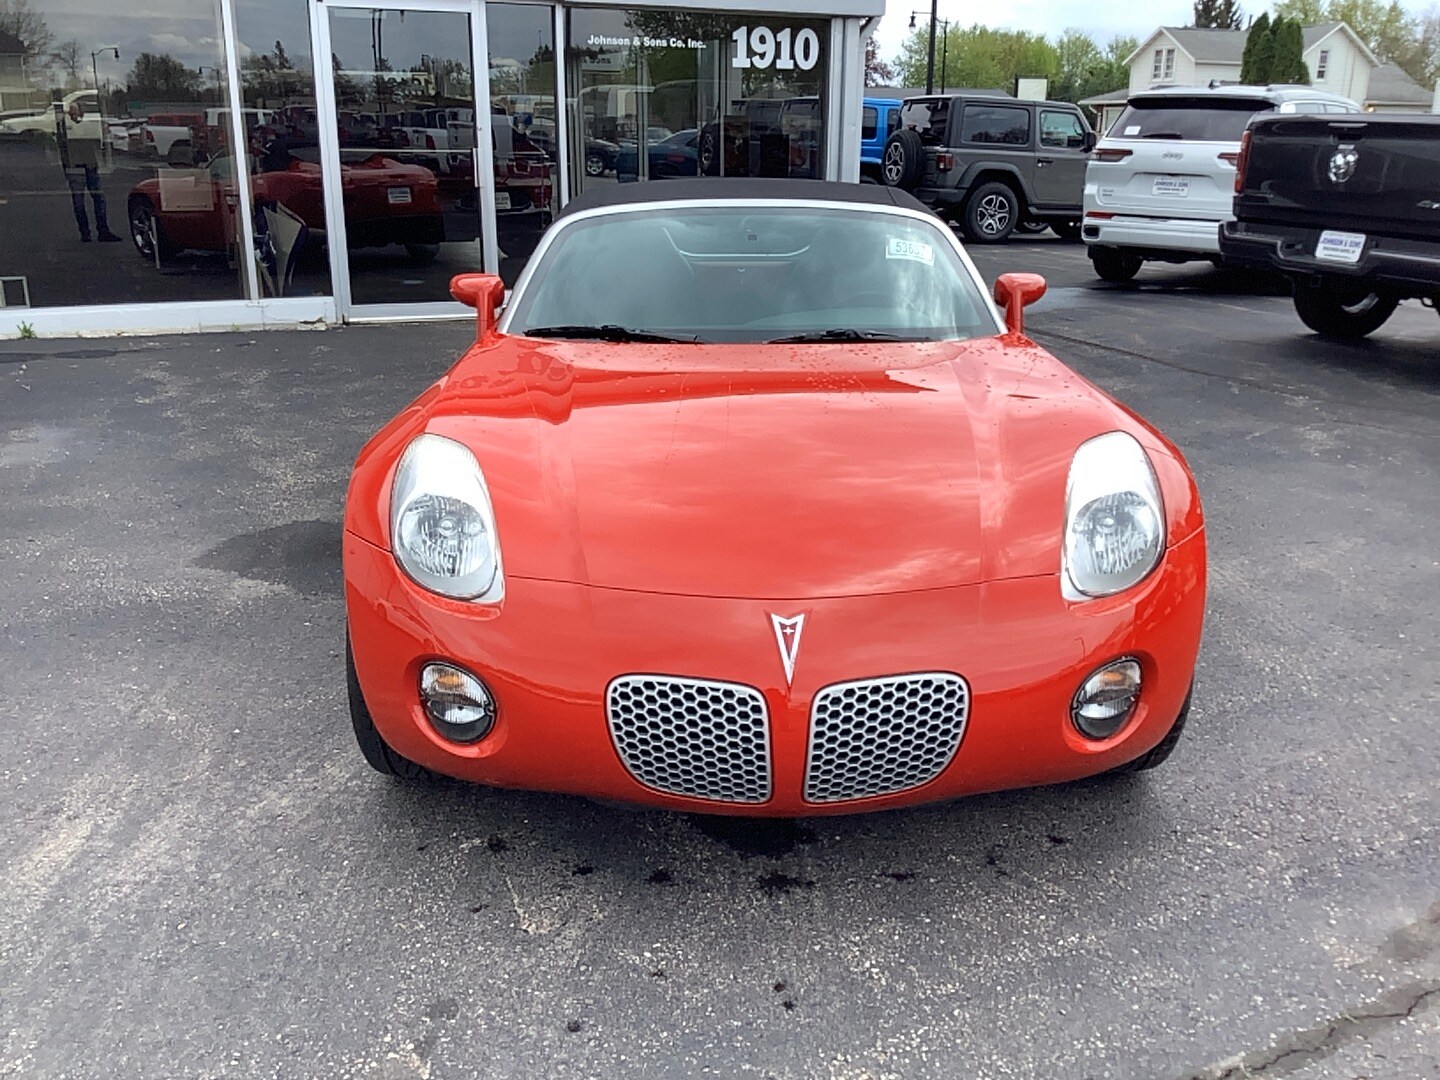 Used 2007 Pontiac Solstice  with VIN 1G2MB35B47Y112632 for sale in Wisconsin Rapids, WI